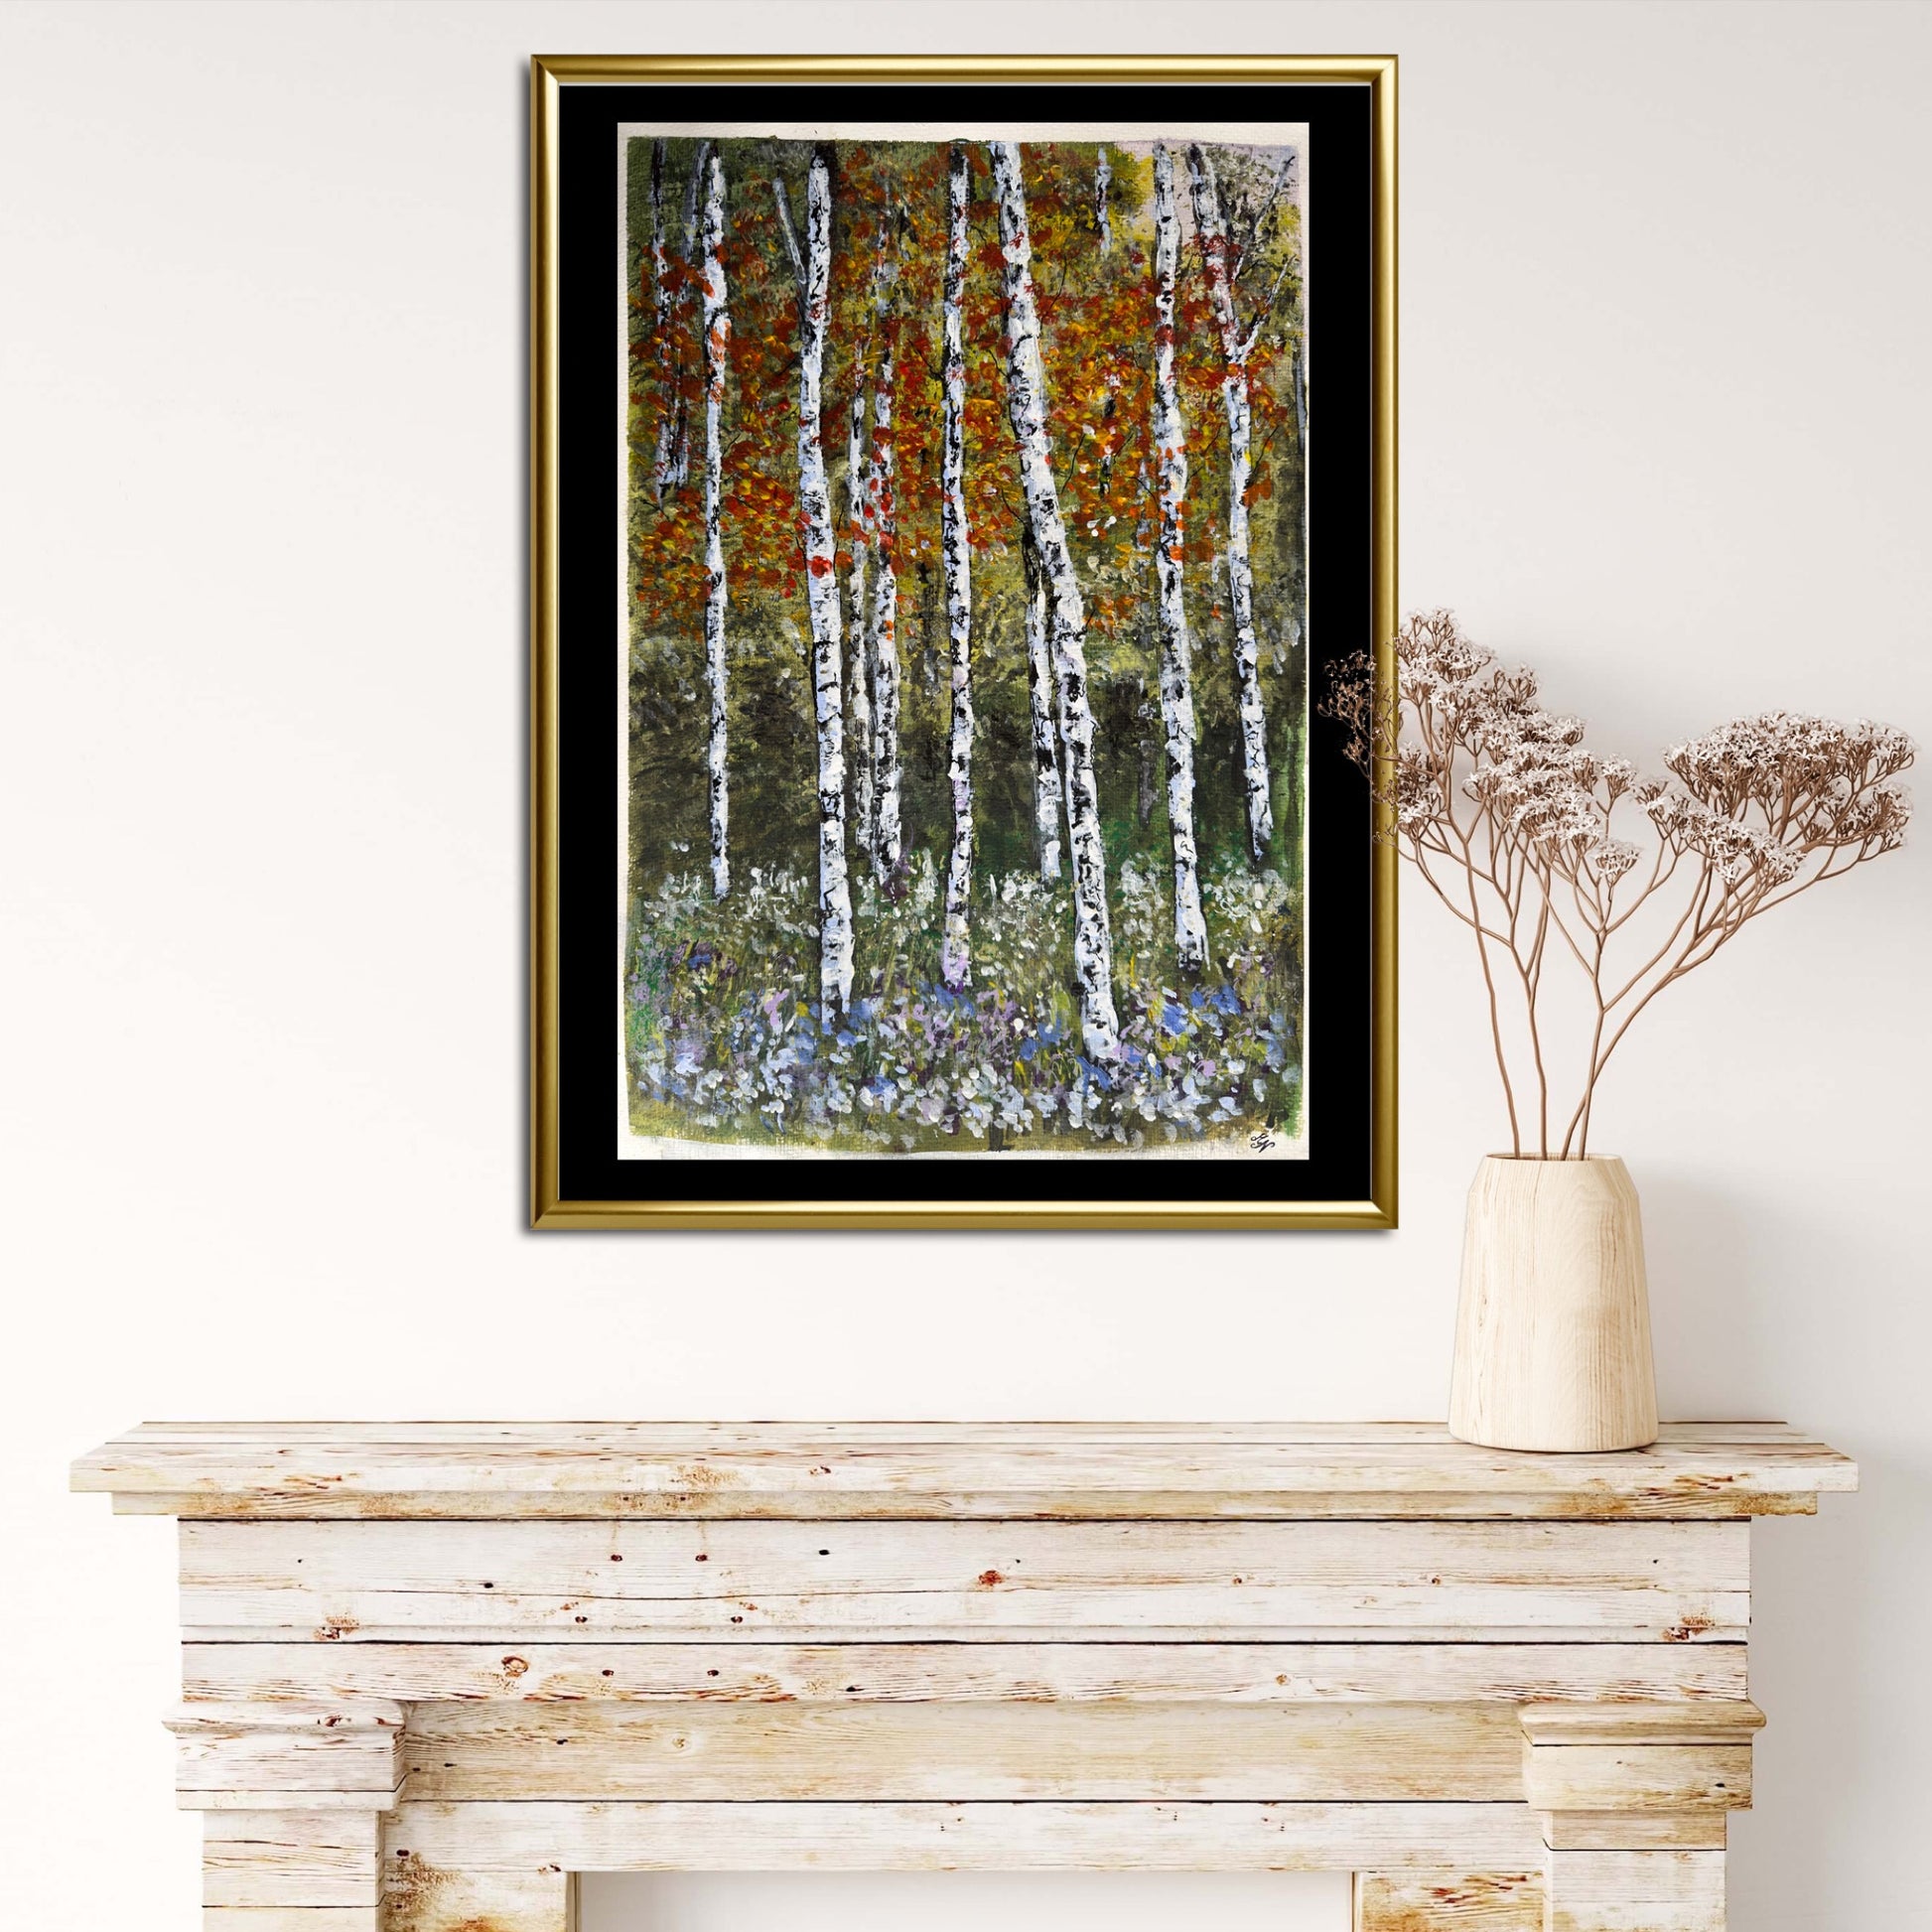 "Nature's Tranquility" - Capturing the serene essence of the woods through art.